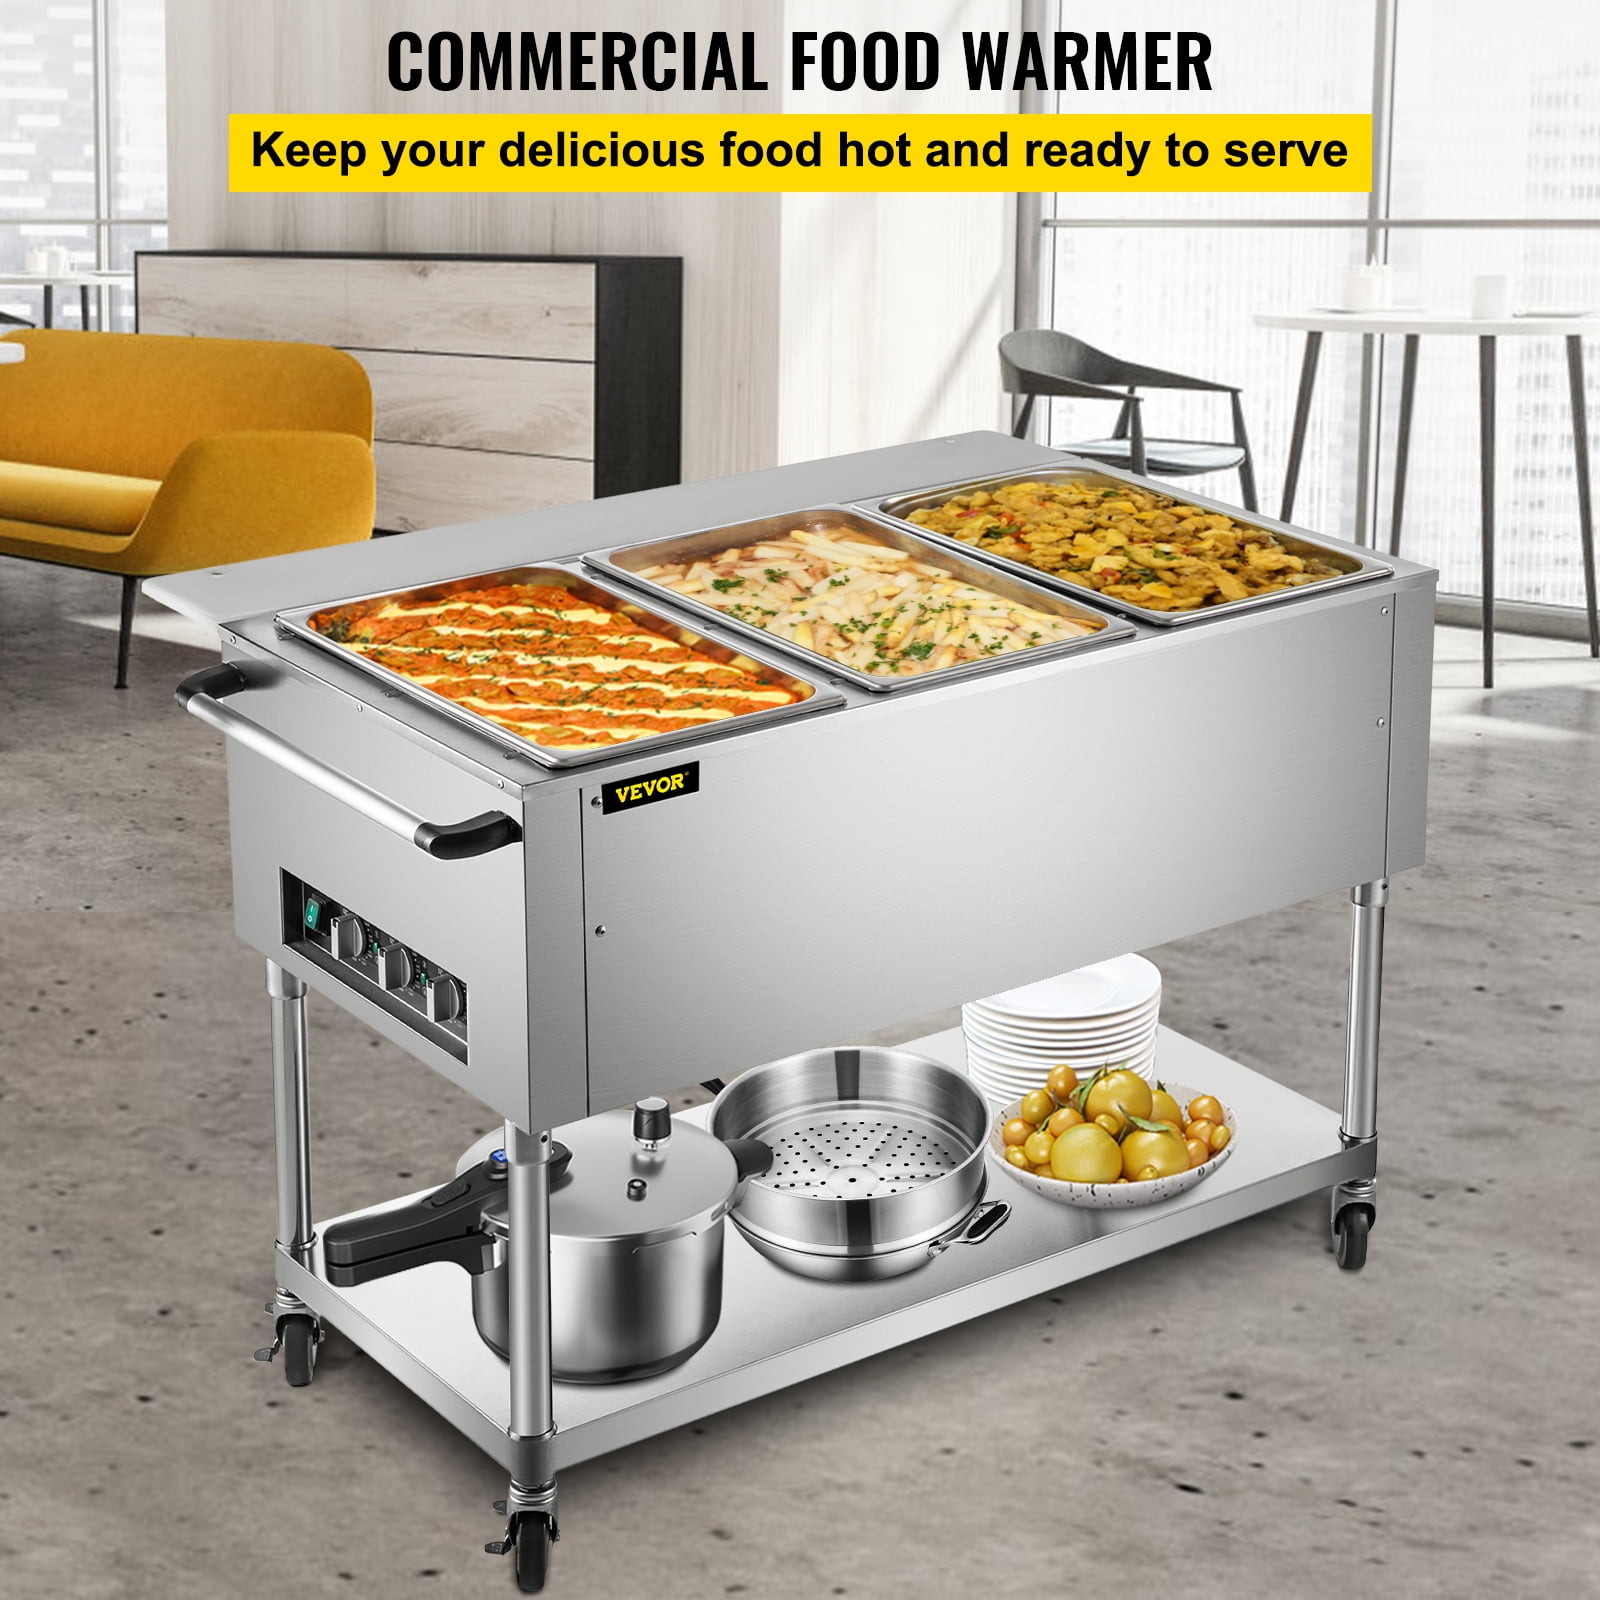 VEVOR Commercial Electric Food Warmer, 3-Pot Steam Table Food Warmer 0-100℃  with 4 Lockable Wheels, Professional Stainless Steel Material with ETL